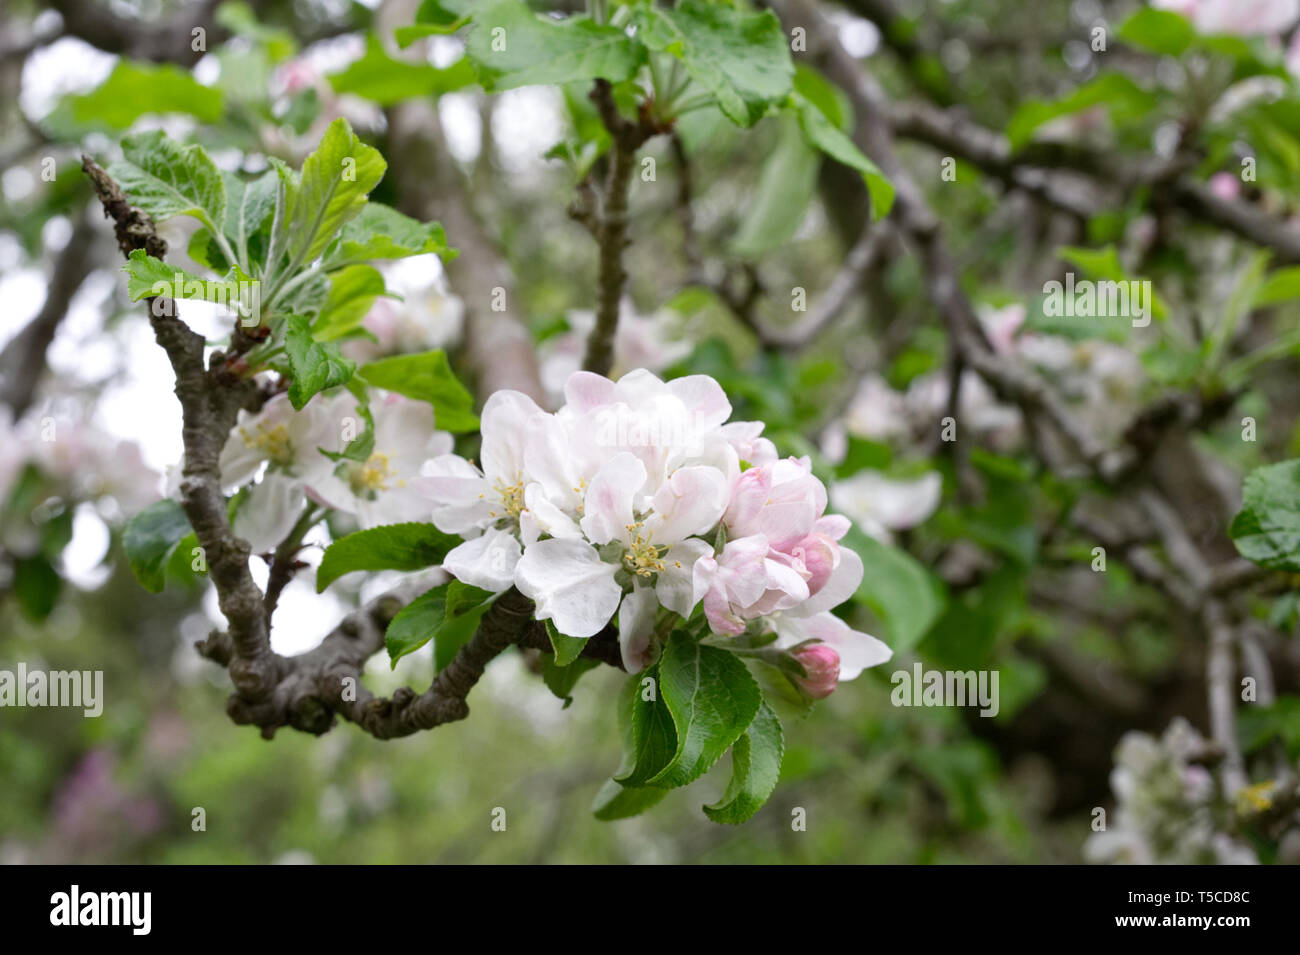 Malus blossom. Apple blossom in Spring. Stock Photo